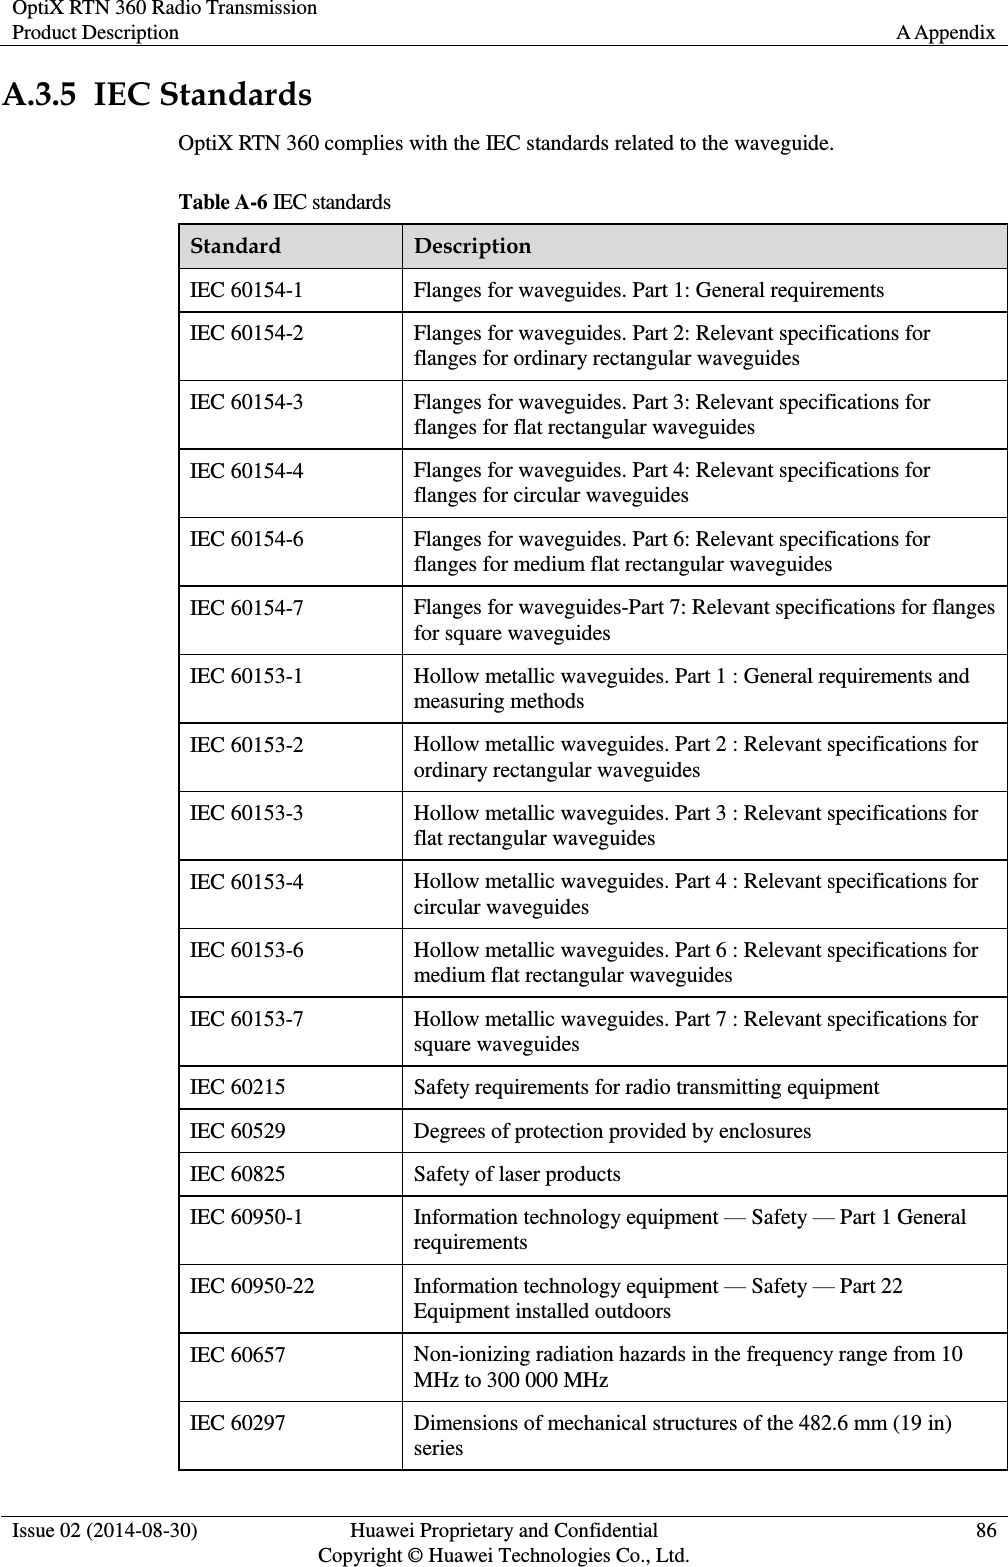 OptiX RTN 360 Radio Transmission Product Description A Appendix  Issue 02 (2014-08-30) Huawei Proprietary and Confidential                                     Copyright © Huawei Technologies Co., Ltd. 86  A.3.5  IEC Standards OptiX RTN 360 complies with the IEC standards related to the waveguide.   Table A-6 IEC standards Standard Description IEC 60154-1 Flanges for waveguides. Part 1: General requirements IEC 60154-2 Flanges for waveguides. Part 2: Relevant specifications for flanges for ordinary rectangular waveguides IEC 60154-3 Flanges for waveguides. Part 3: Relevant specifications for flanges for flat rectangular waveguides IEC 60154-4 Flanges for waveguides. Part 4: Relevant specifications for flanges for circular waveguides IEC 60154-6 Flanges for waveguides. Part 6: Relevant specifications for flanges for medium flat rectangular waveguides IEC 60154-7 Flanges for waveguides-Part 7: Relevant specifications for flanges for square waveguides IEC 60153-1 Hollow metallic waveguides. Part 1 : General requirements and measuring methods IEC 60153-2 Hollow metallic waveguides. Part 2 : Relevant specifications for ordinary rectangular waveguides IEC 60153-3 Hollow metallic waveguides. Part 3 : Relevant specifications for flat rectangular waveguides IEC 60153-4 Hollow metallic waveguides. Part 4 : Relevant specifications for circular waveguides IEC 60153-6 Hollow metallic waveguides. Part 6 : Relevant specifications for medium flat rectangular waveguides IEC 60153-7 Hollow metallic waveguides. Part 7 : Relevant specifications for square waveguides IEC 60215 Safety requirements for radio transmitting equipment IEC 60529 Degrees of protection provided by enclosures IEC 60825 Safety of laser products IEC 60950-1 Information technology equipment — Safety — Part 1 General requirements IEC 60950-22 Information technology equipment — Safety — Part 22 Equipment installed outdoors IEC 60657   Non-ionizing radiation hazards in the frequency range from 10 MHz to 300 000 MHz IEC 60297 Dimensions of mechanical structures of the 482.6 mm (19 in) series 